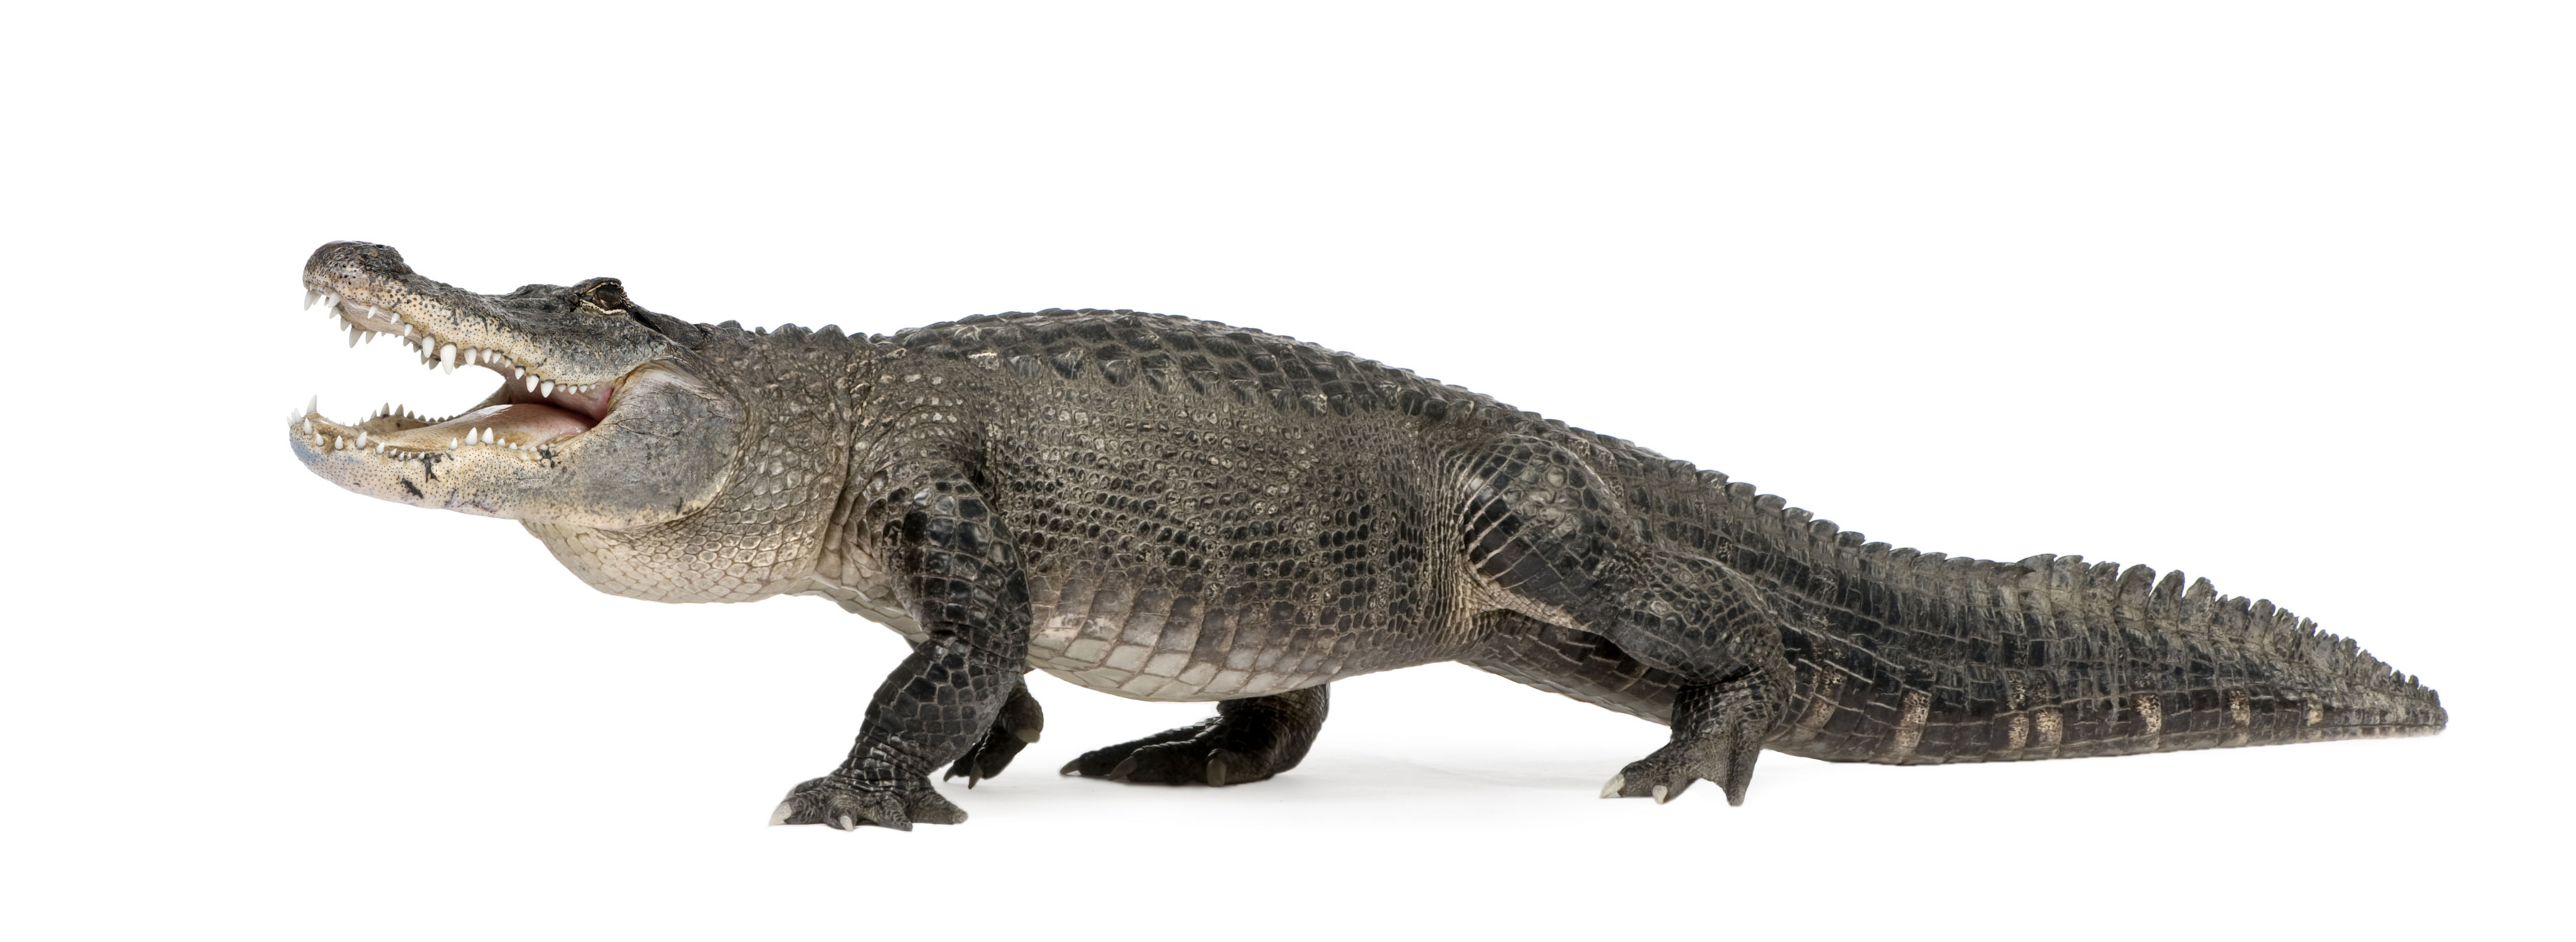 HD Quality Wallpaper | Collection: Animal, 3737x1367 Alligator